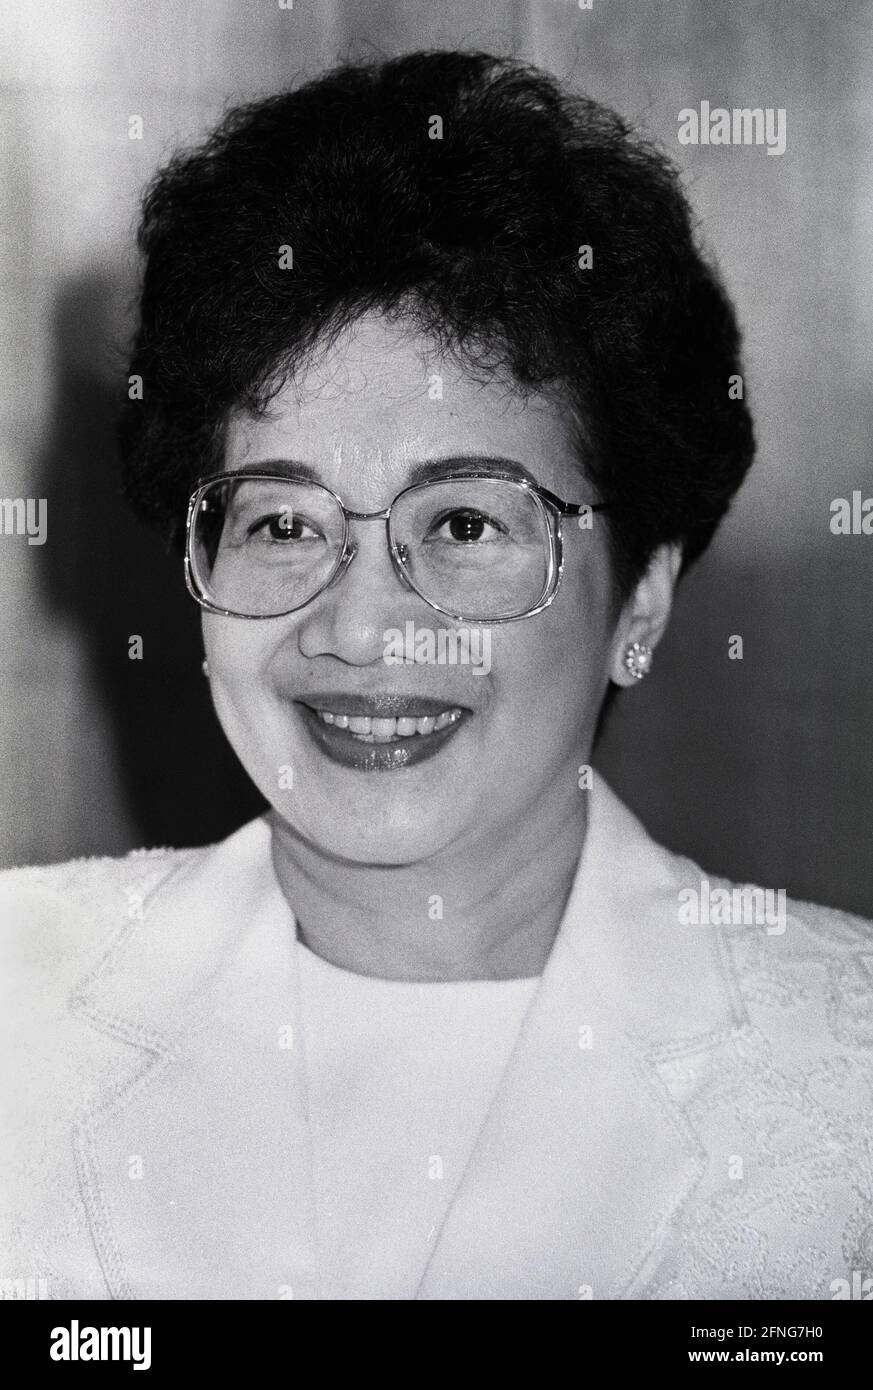 Germany, Bonn, 11.07.1989. Archive No: 07-13-12 State visit of the President of the Philippines Photo: President Corazon Aquino [automated translation] Stock Photo